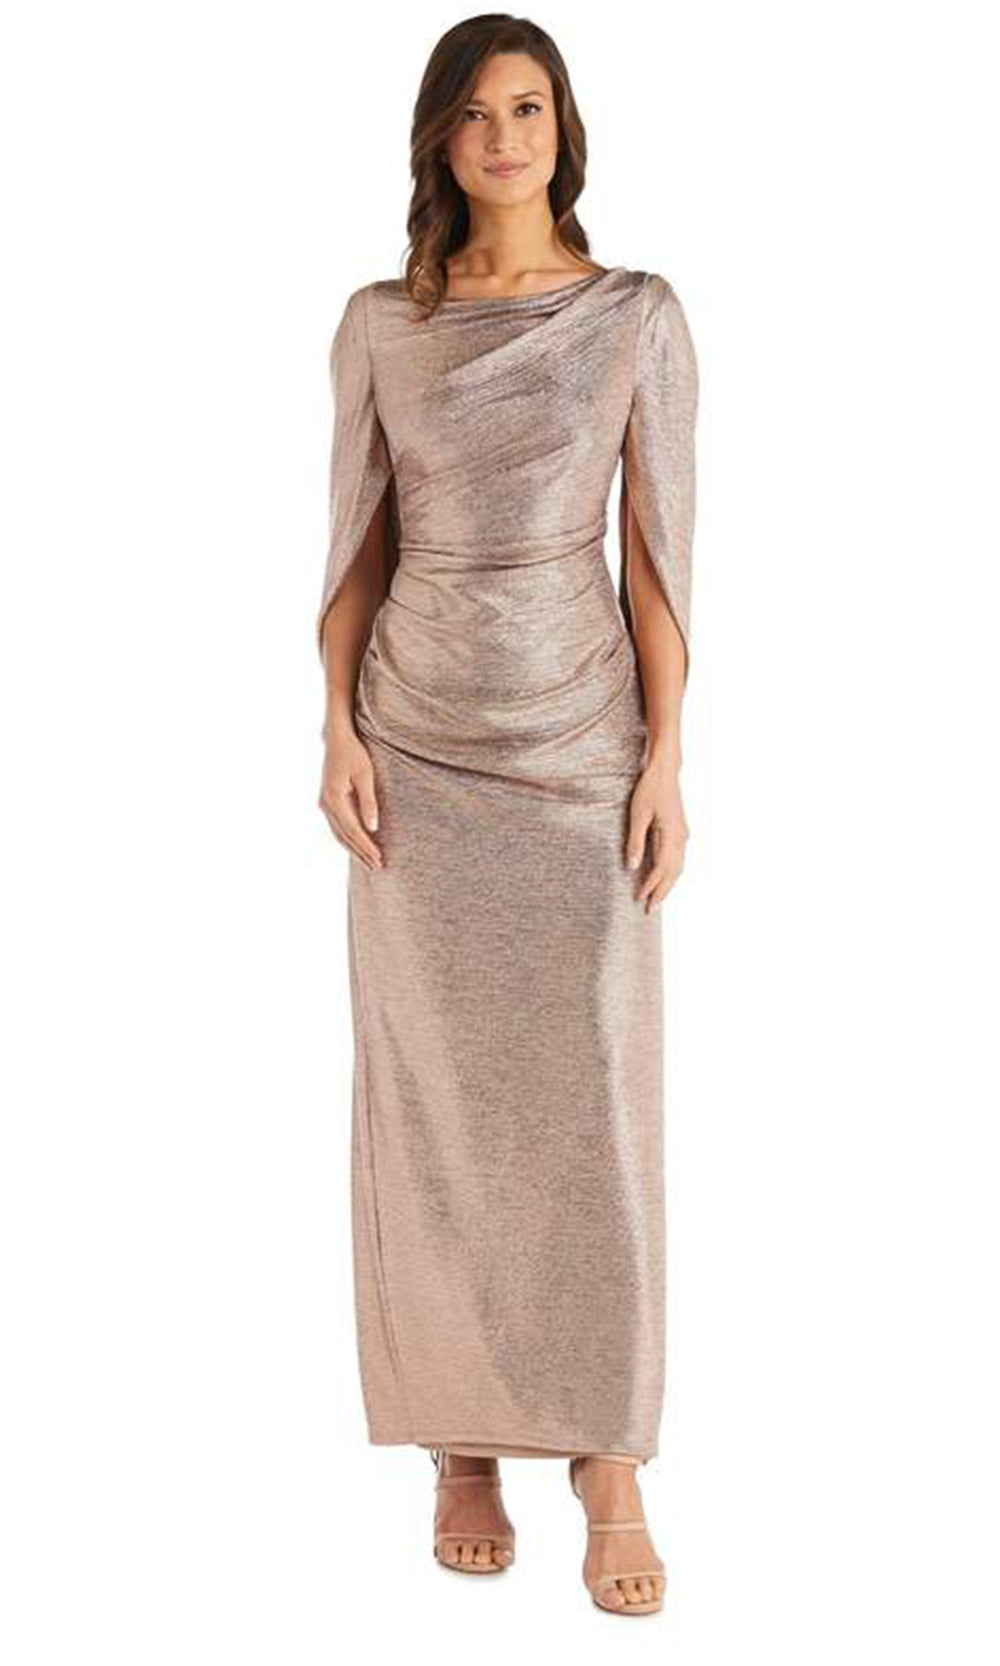 R&M Richards - Long Dress with Back Drape Sleeves 7472W - 1 pc Rose Gold In Size 14W Available CCSALE 14W / Rose Gold